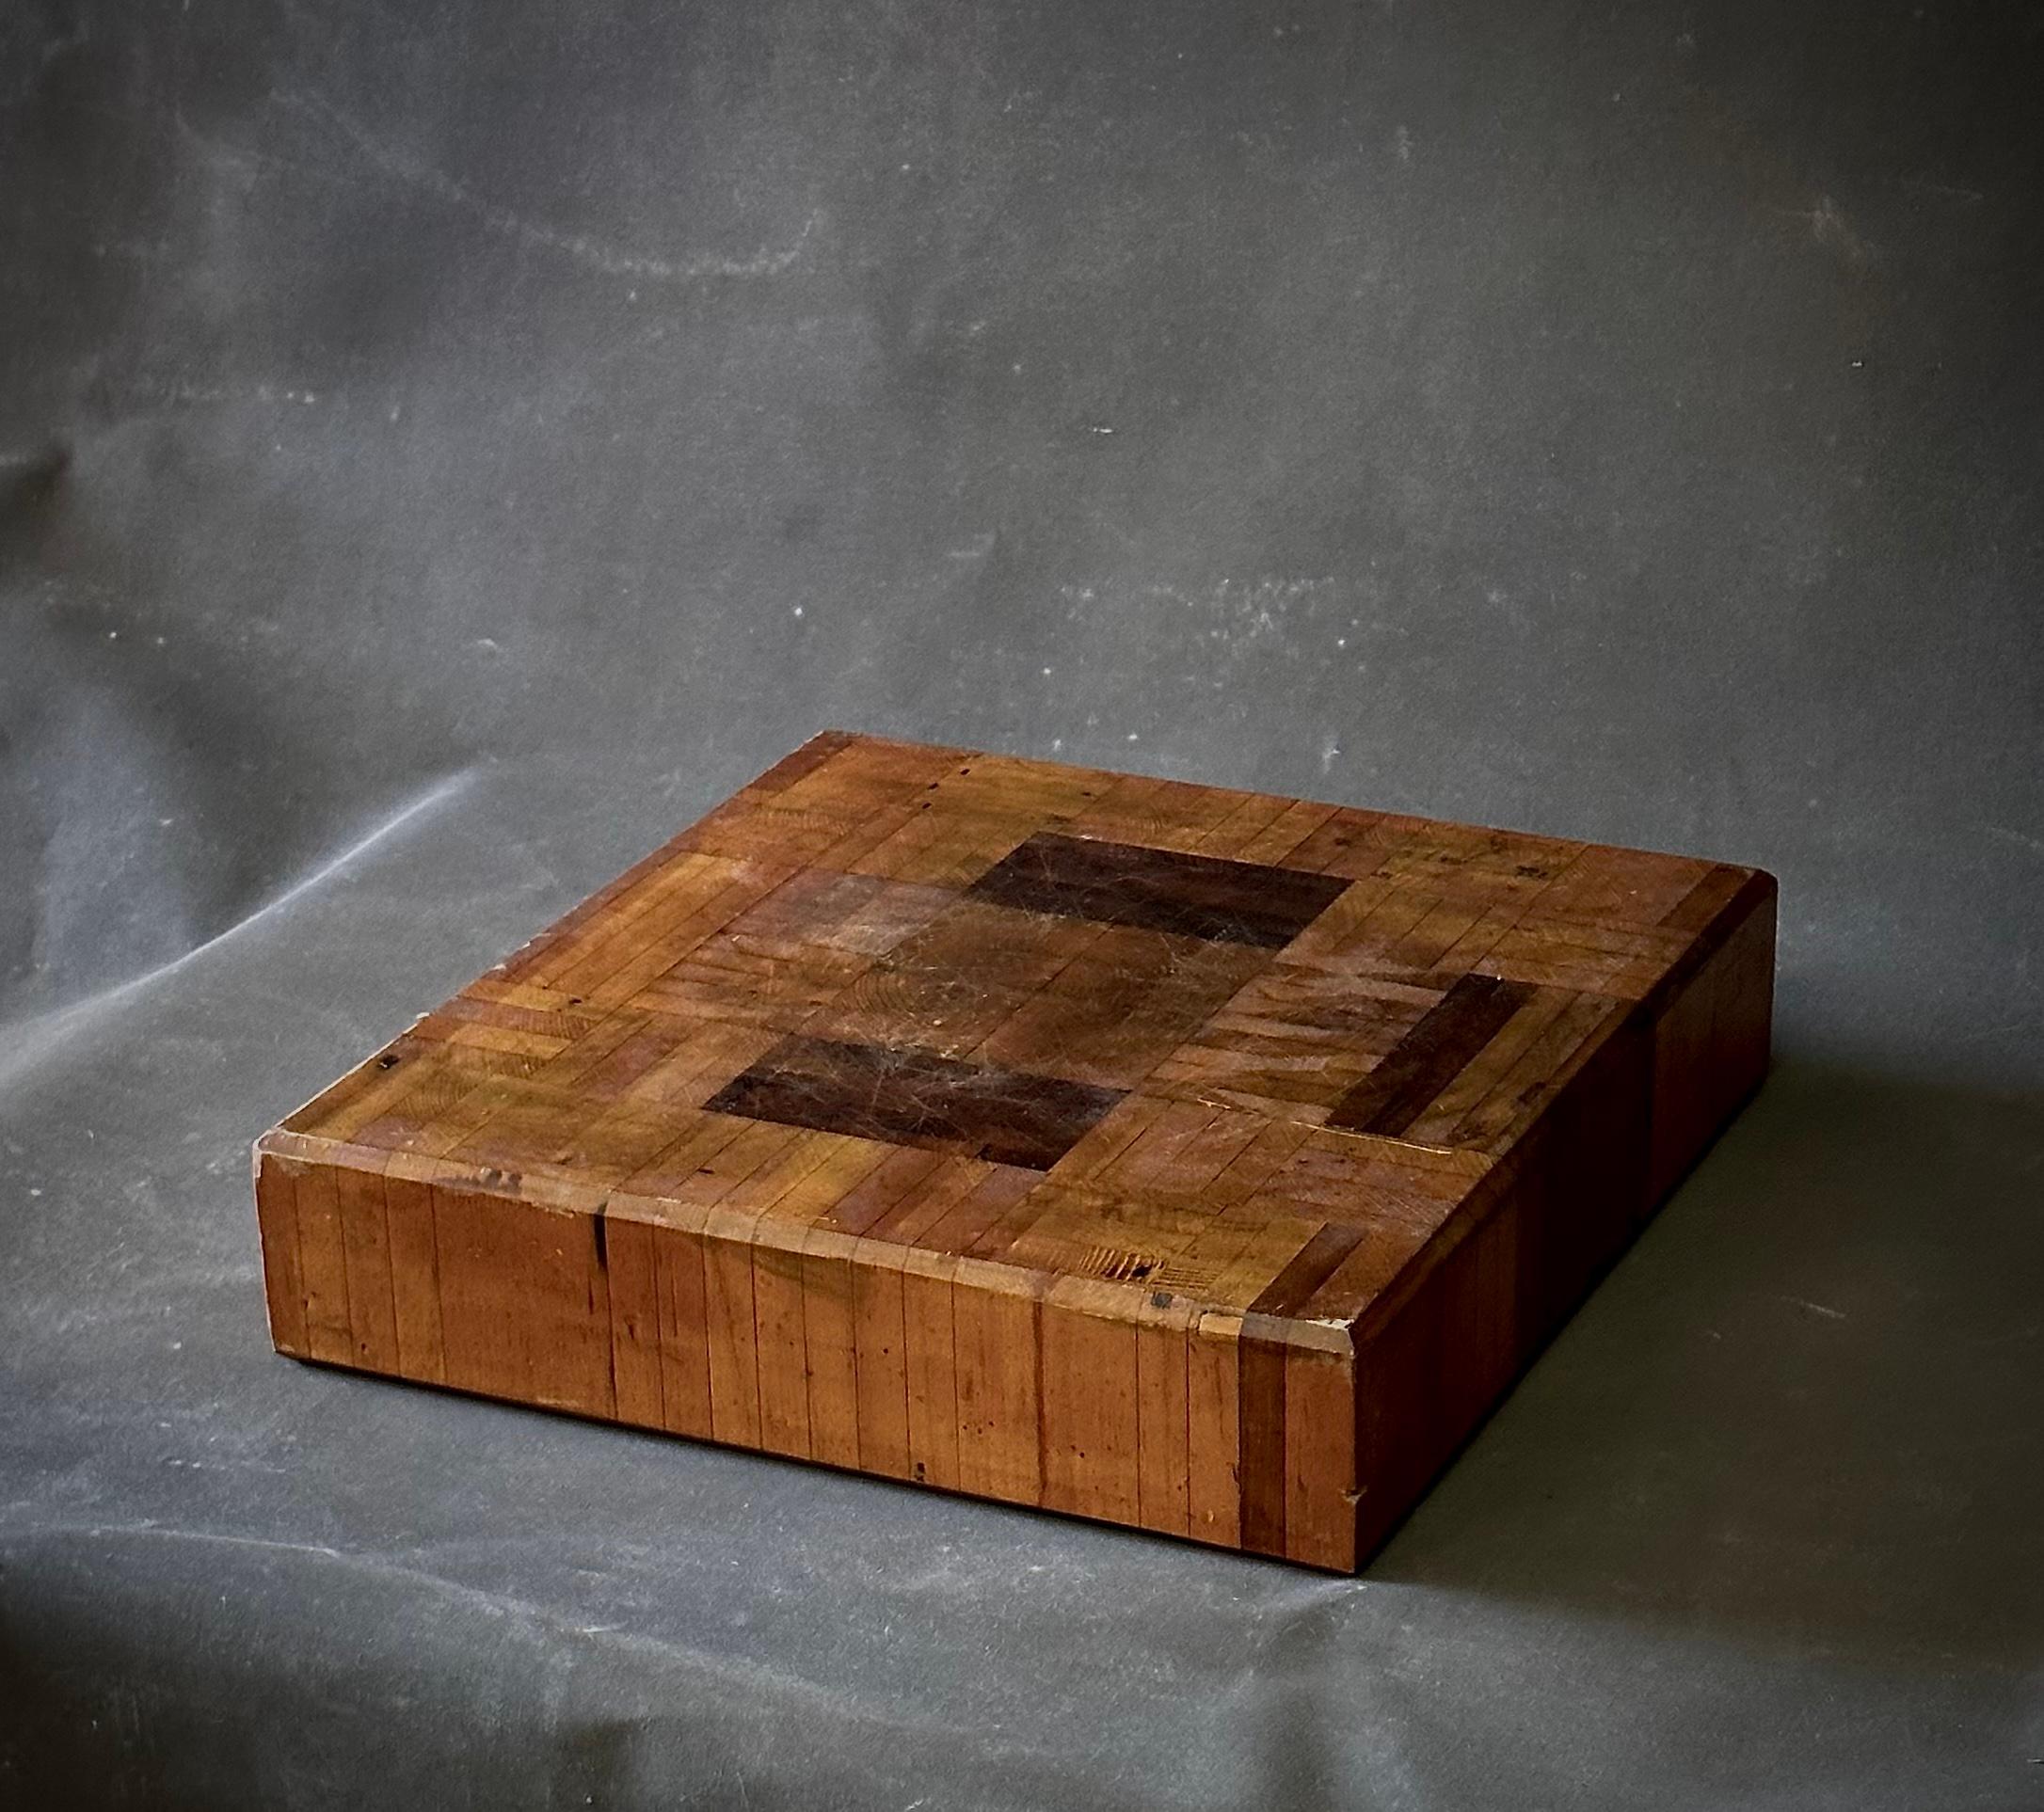 Early 20th century, French butcher block. The warm tones of wood and parquet-style surface make this an interesting tabletop accent or serving platter. 

France, circa 1890.

Dimensions: 17.5 W x 17 D x 4 H.